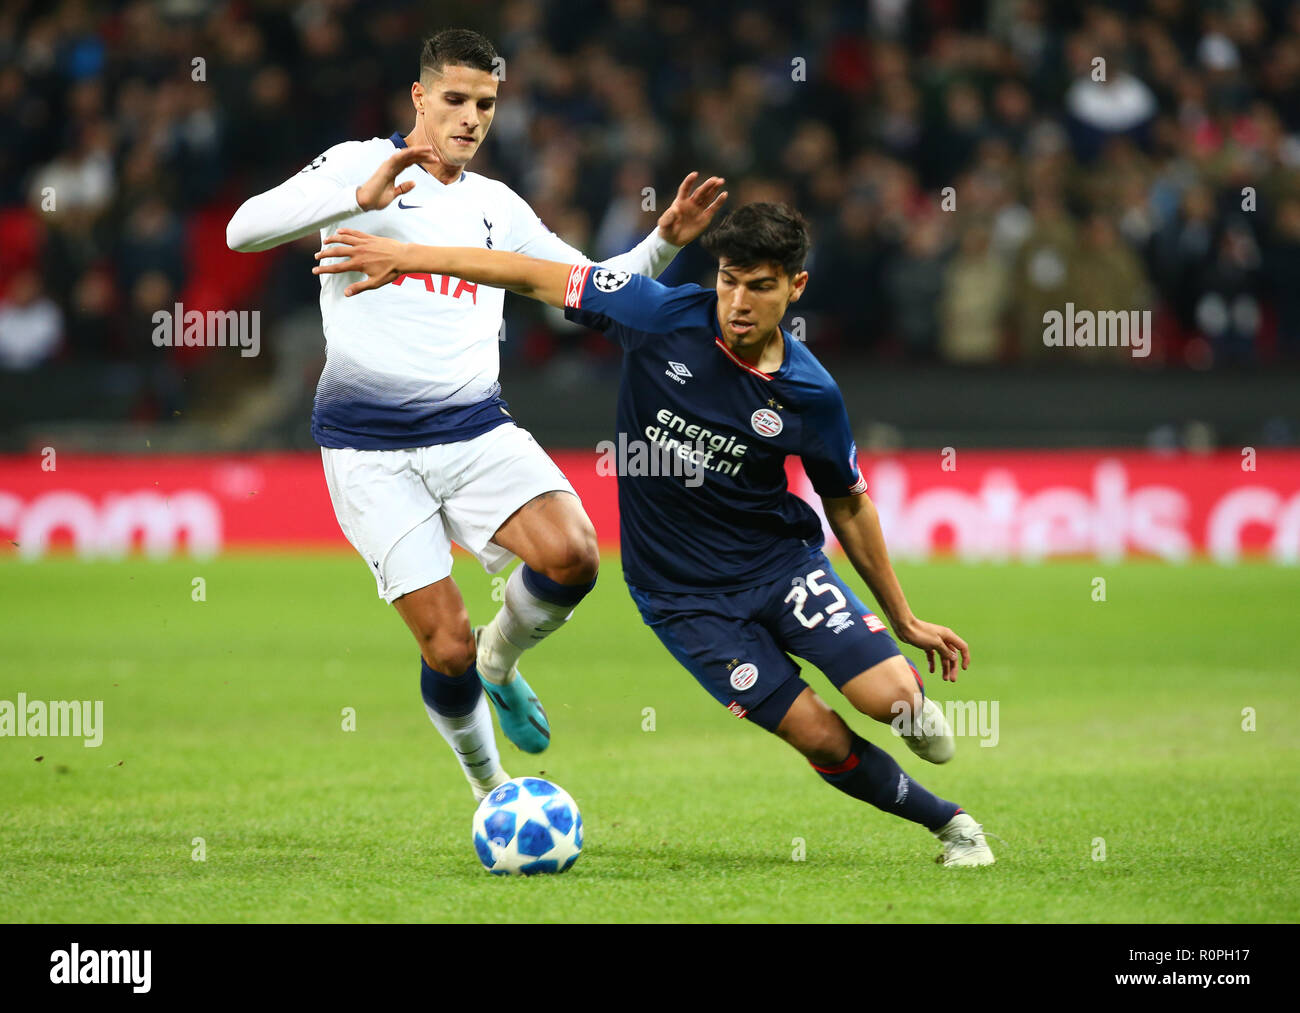 London, England, 06th November 2018.  Erick Gutierrez of PSV Eindhoven beats Tottenham Hotspur's Erik Lamela during Champion League Group B between Tottenham Hotspur and PSV Eindhoven at Wembley stadium , London, England on 06 Nov 2018. Credit Action Foto Sport  FA Premier League and Football League images are subject to DataCo Licence. Editorial use ONLY. No print sales. No personal use sales. NO UNPAID USE Credit: Action Foto Sport/Alamy Live News Stock Photo